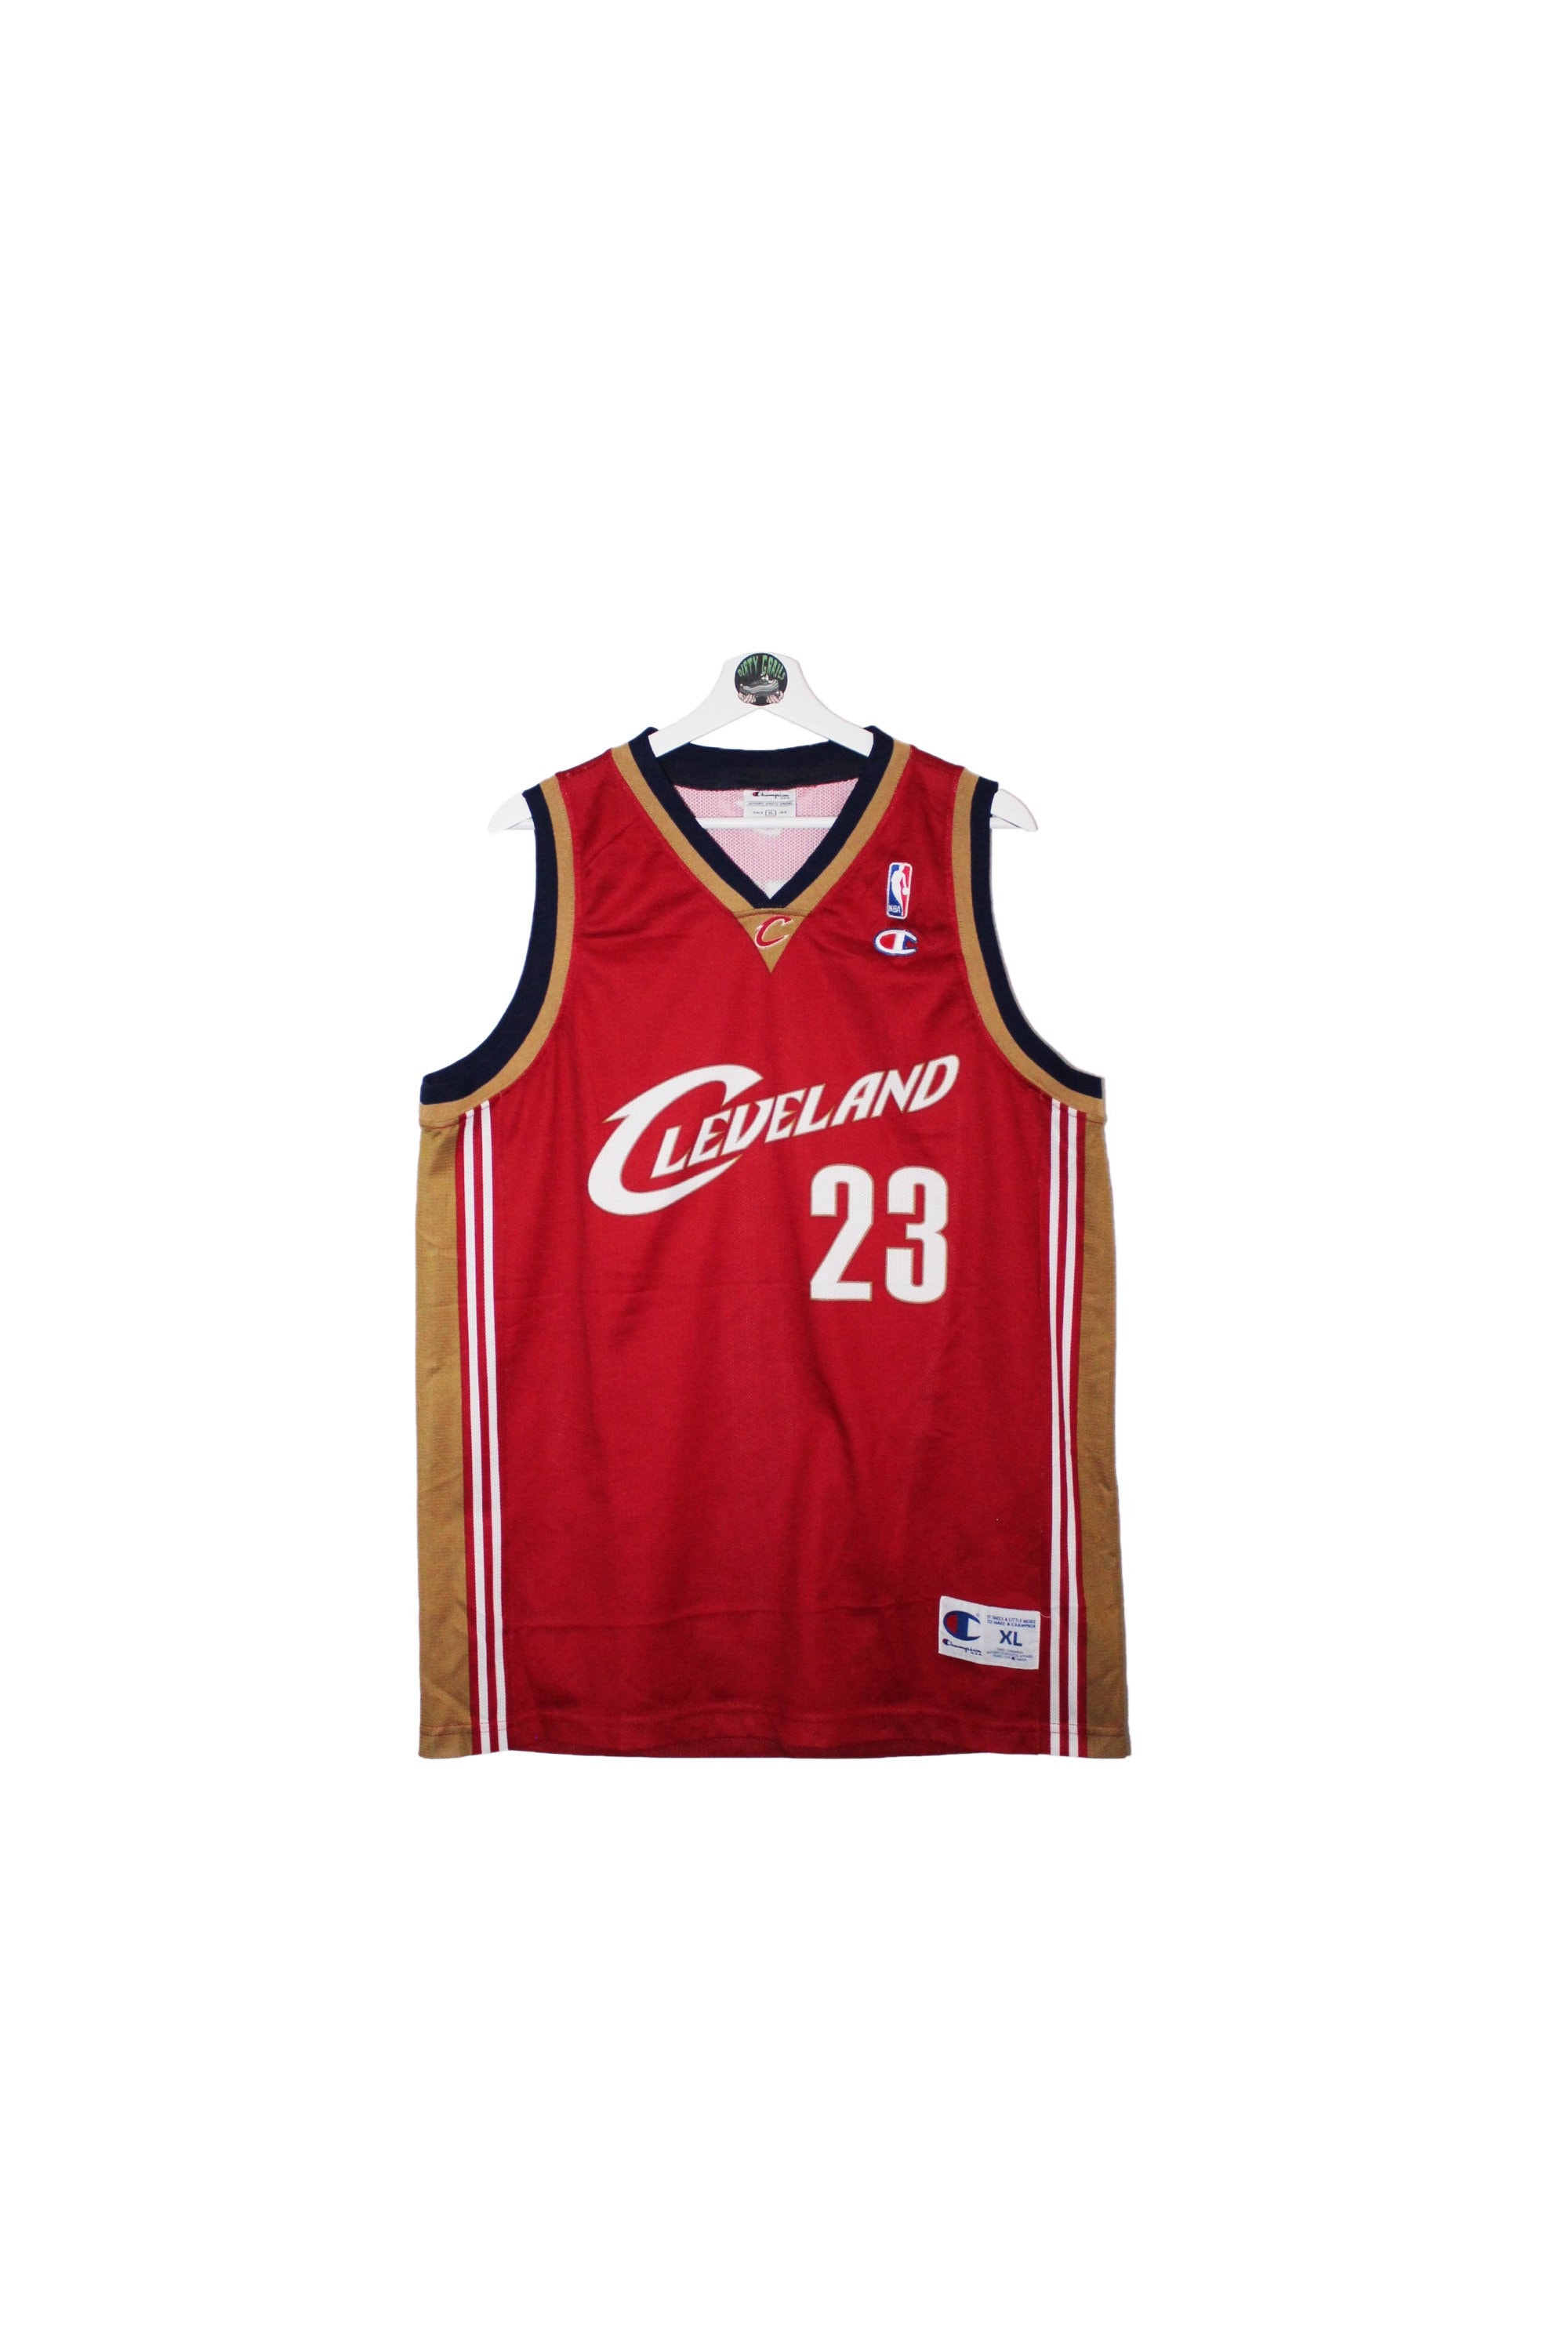 LeBron James Liverpool shirt: How to buy, price and will Reds wear NBA  legend's jersey?